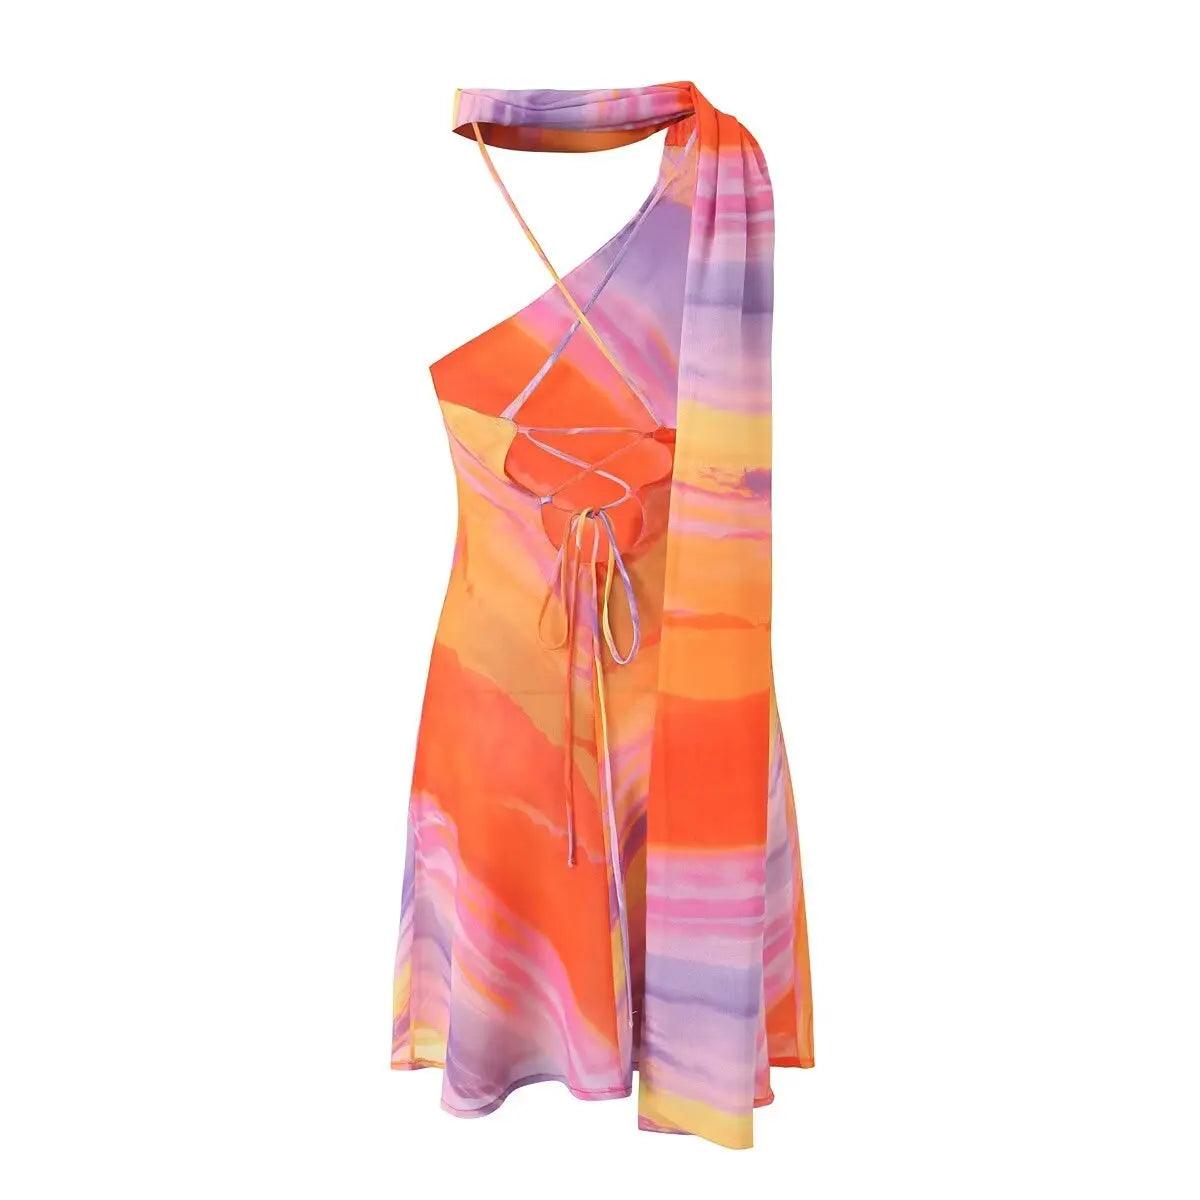 Sunset Beach Mini Dress from The House of CO-KY - Dresses